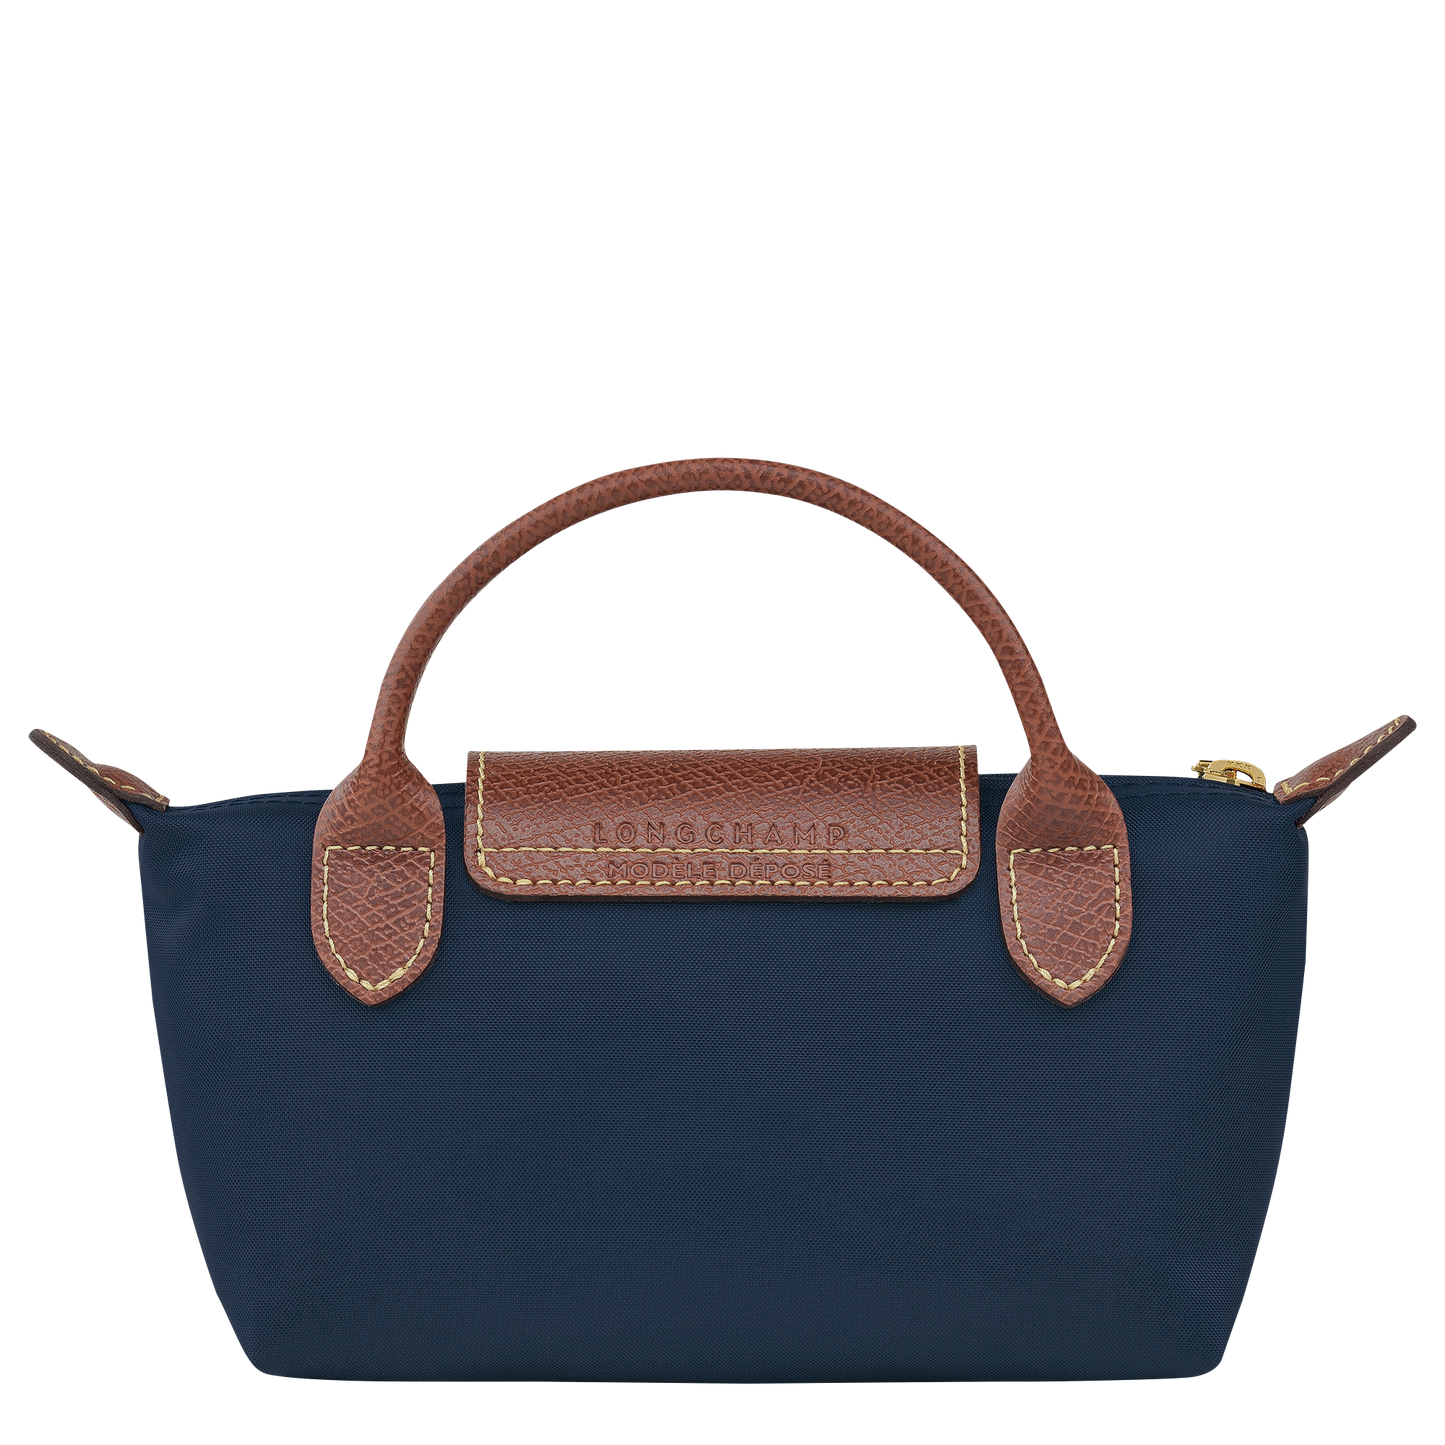 Longchamp LE PLIAGE ORIGINAL - Pouch with handle in Navy - 2 (SKU: 34175089P68)